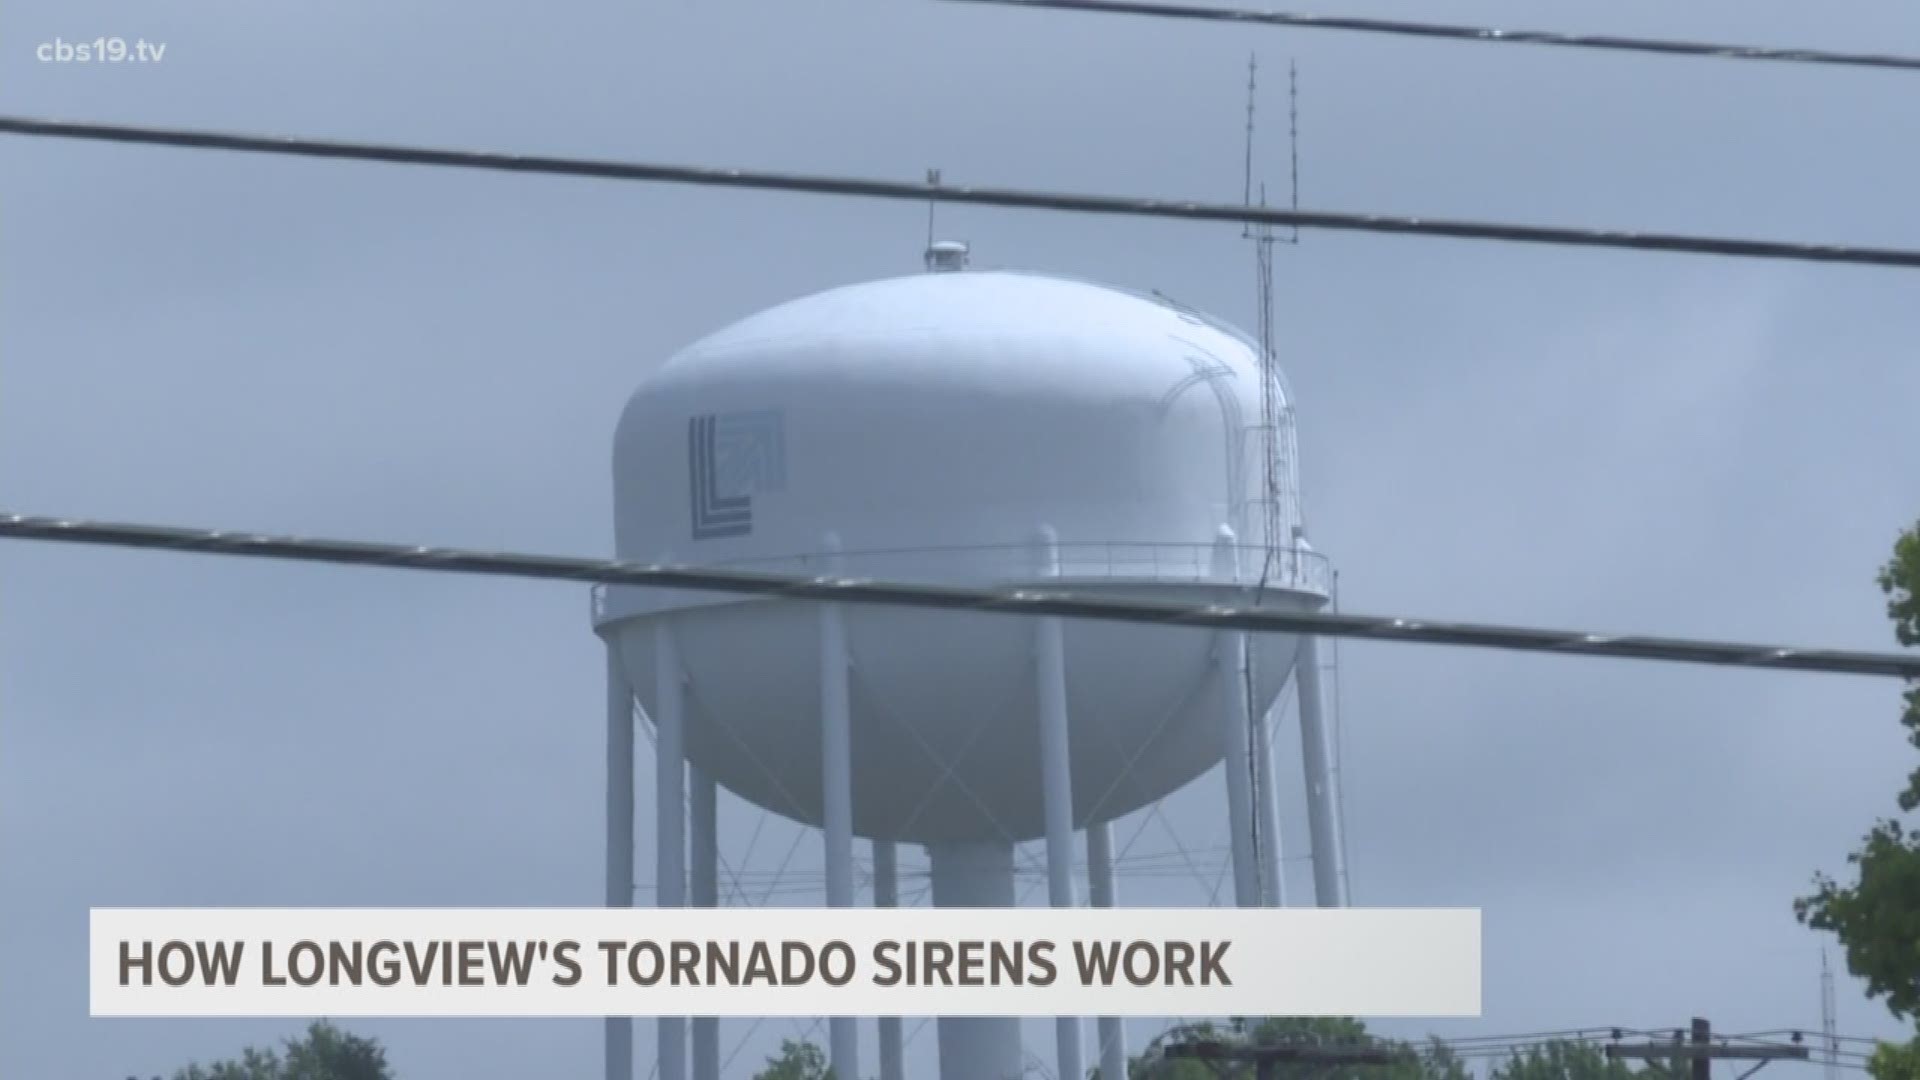 With storms causing major damage in Longview, some are wondering why the emergency sirens did not sound.